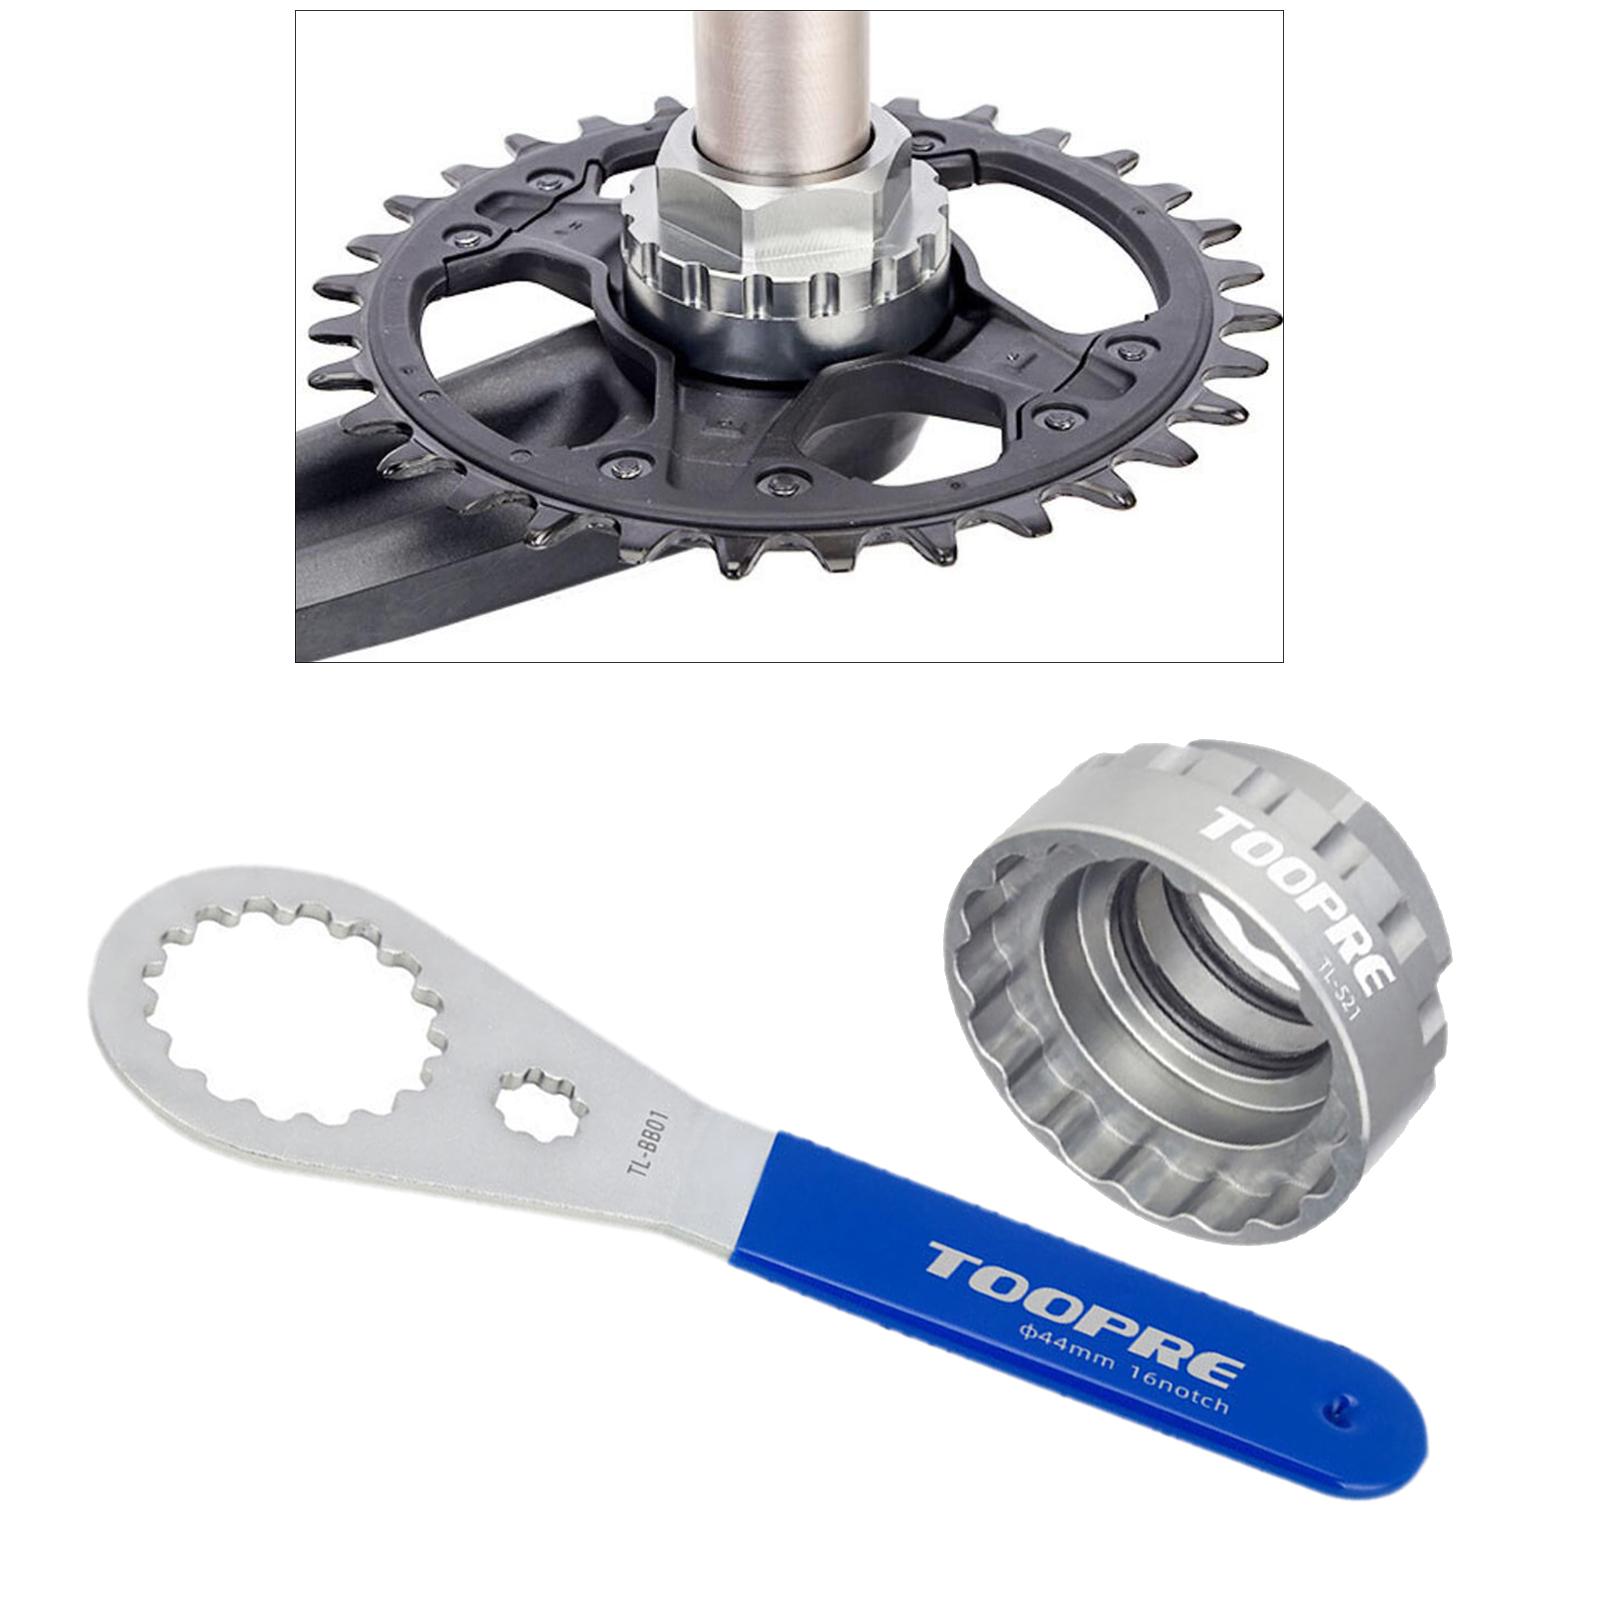 12S Chainring Lock Ring Bike Removal Installation Tool Steel + Wrench